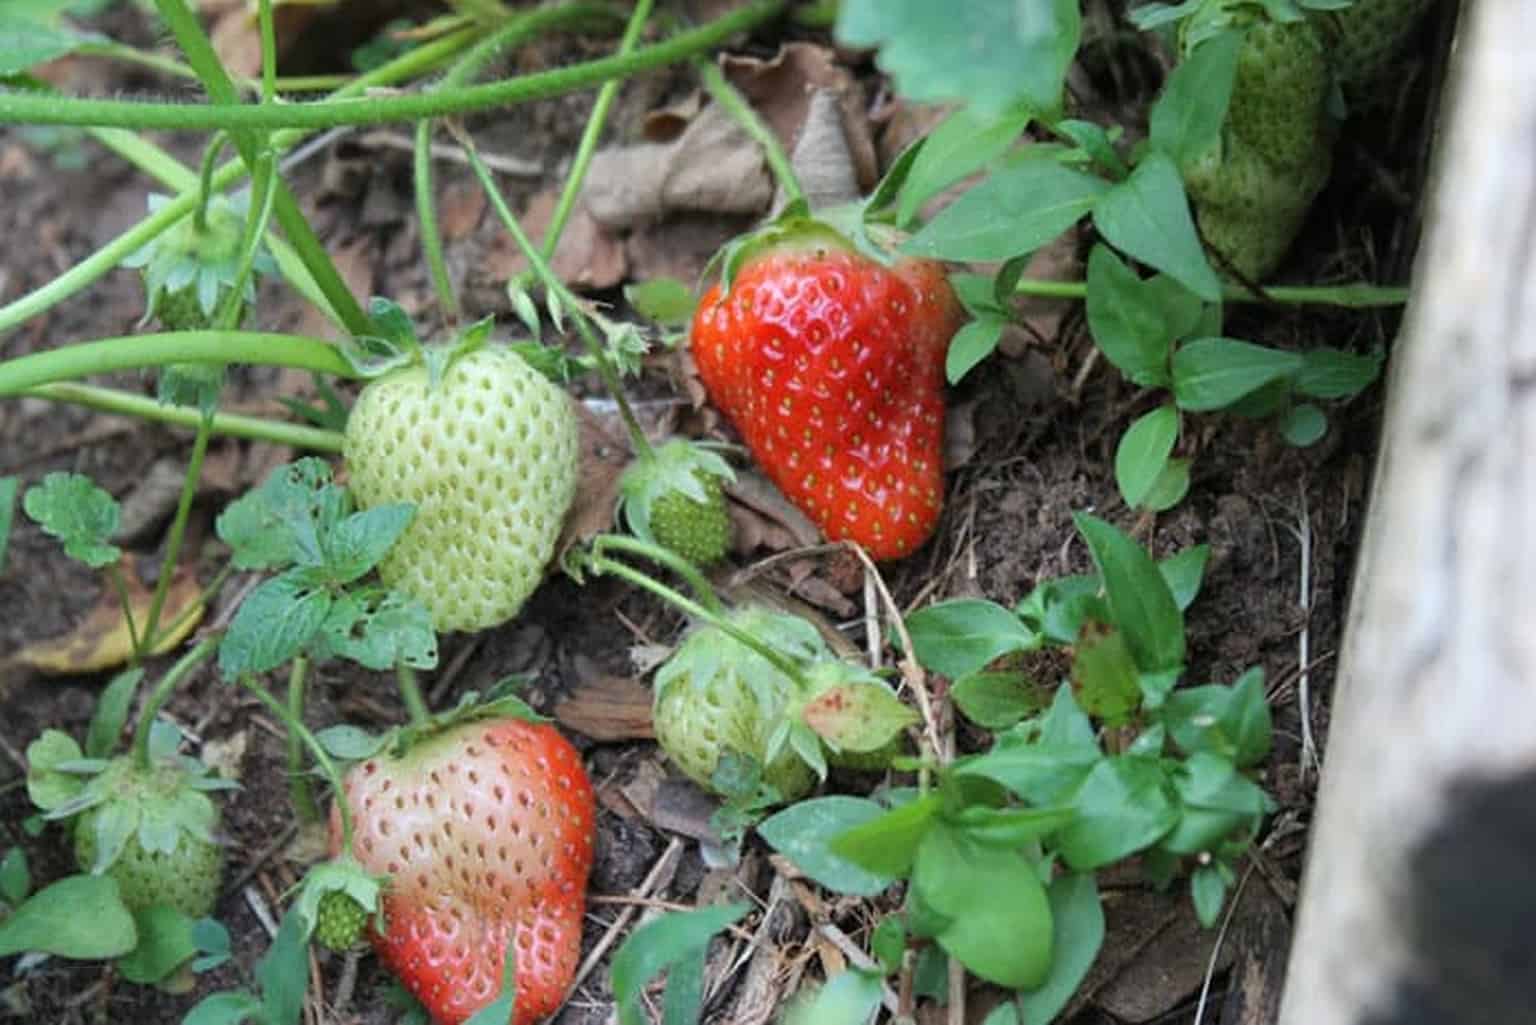 strawberry fruits almost ready for harvest